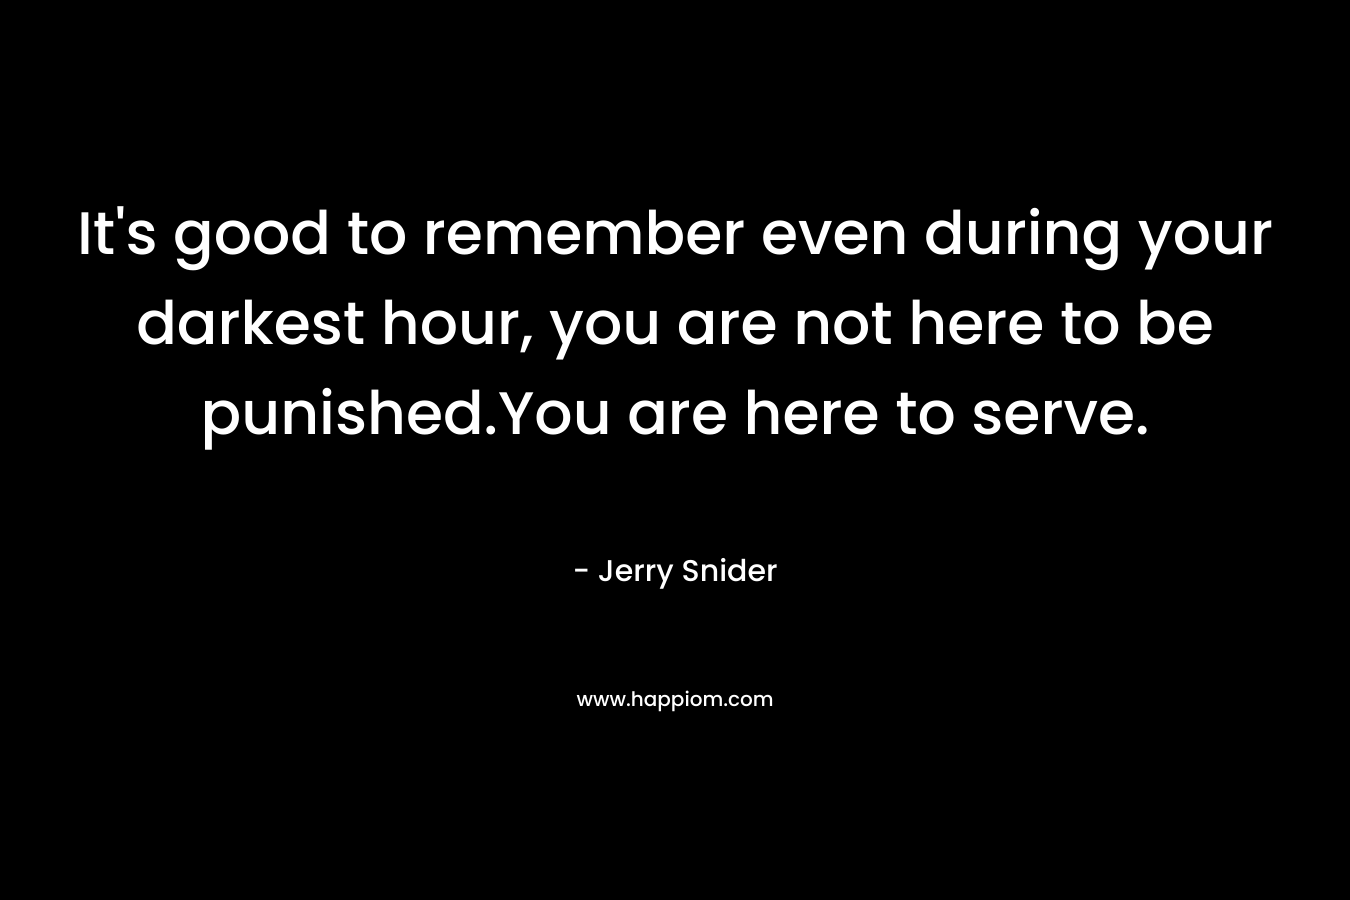 It's good to remember even during your darkest hour, you are not here to be punished.You are here to serve.